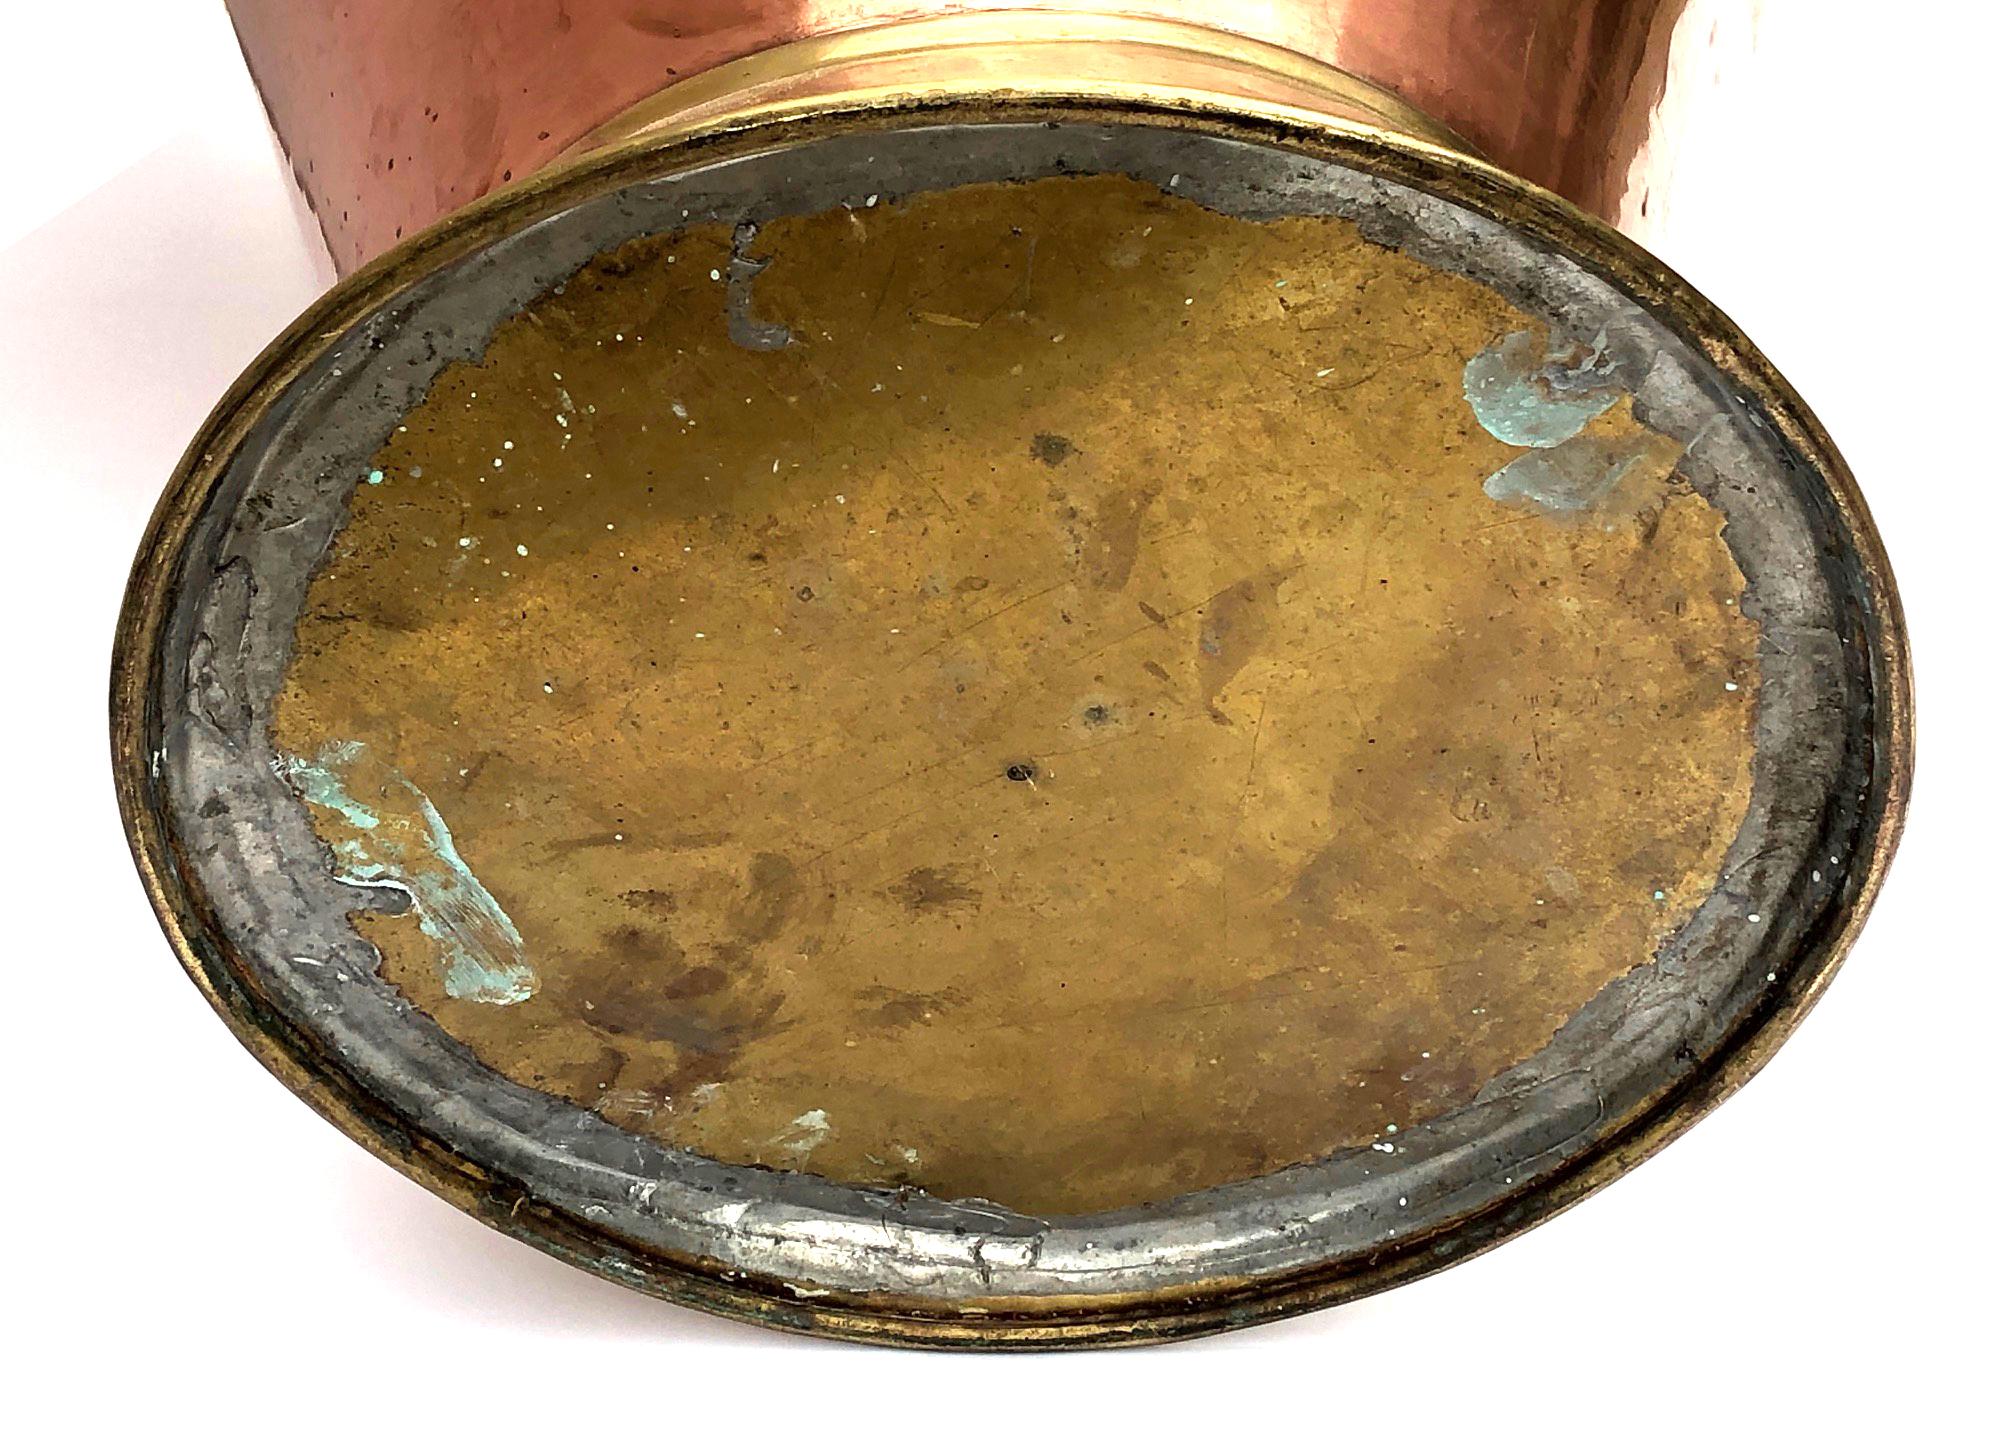 of extra large scale and composed of contrasting metals; with wide protruding mouth connected to the ovoid copper body by a brass riveted ring all joined by a large brass ear or handle.